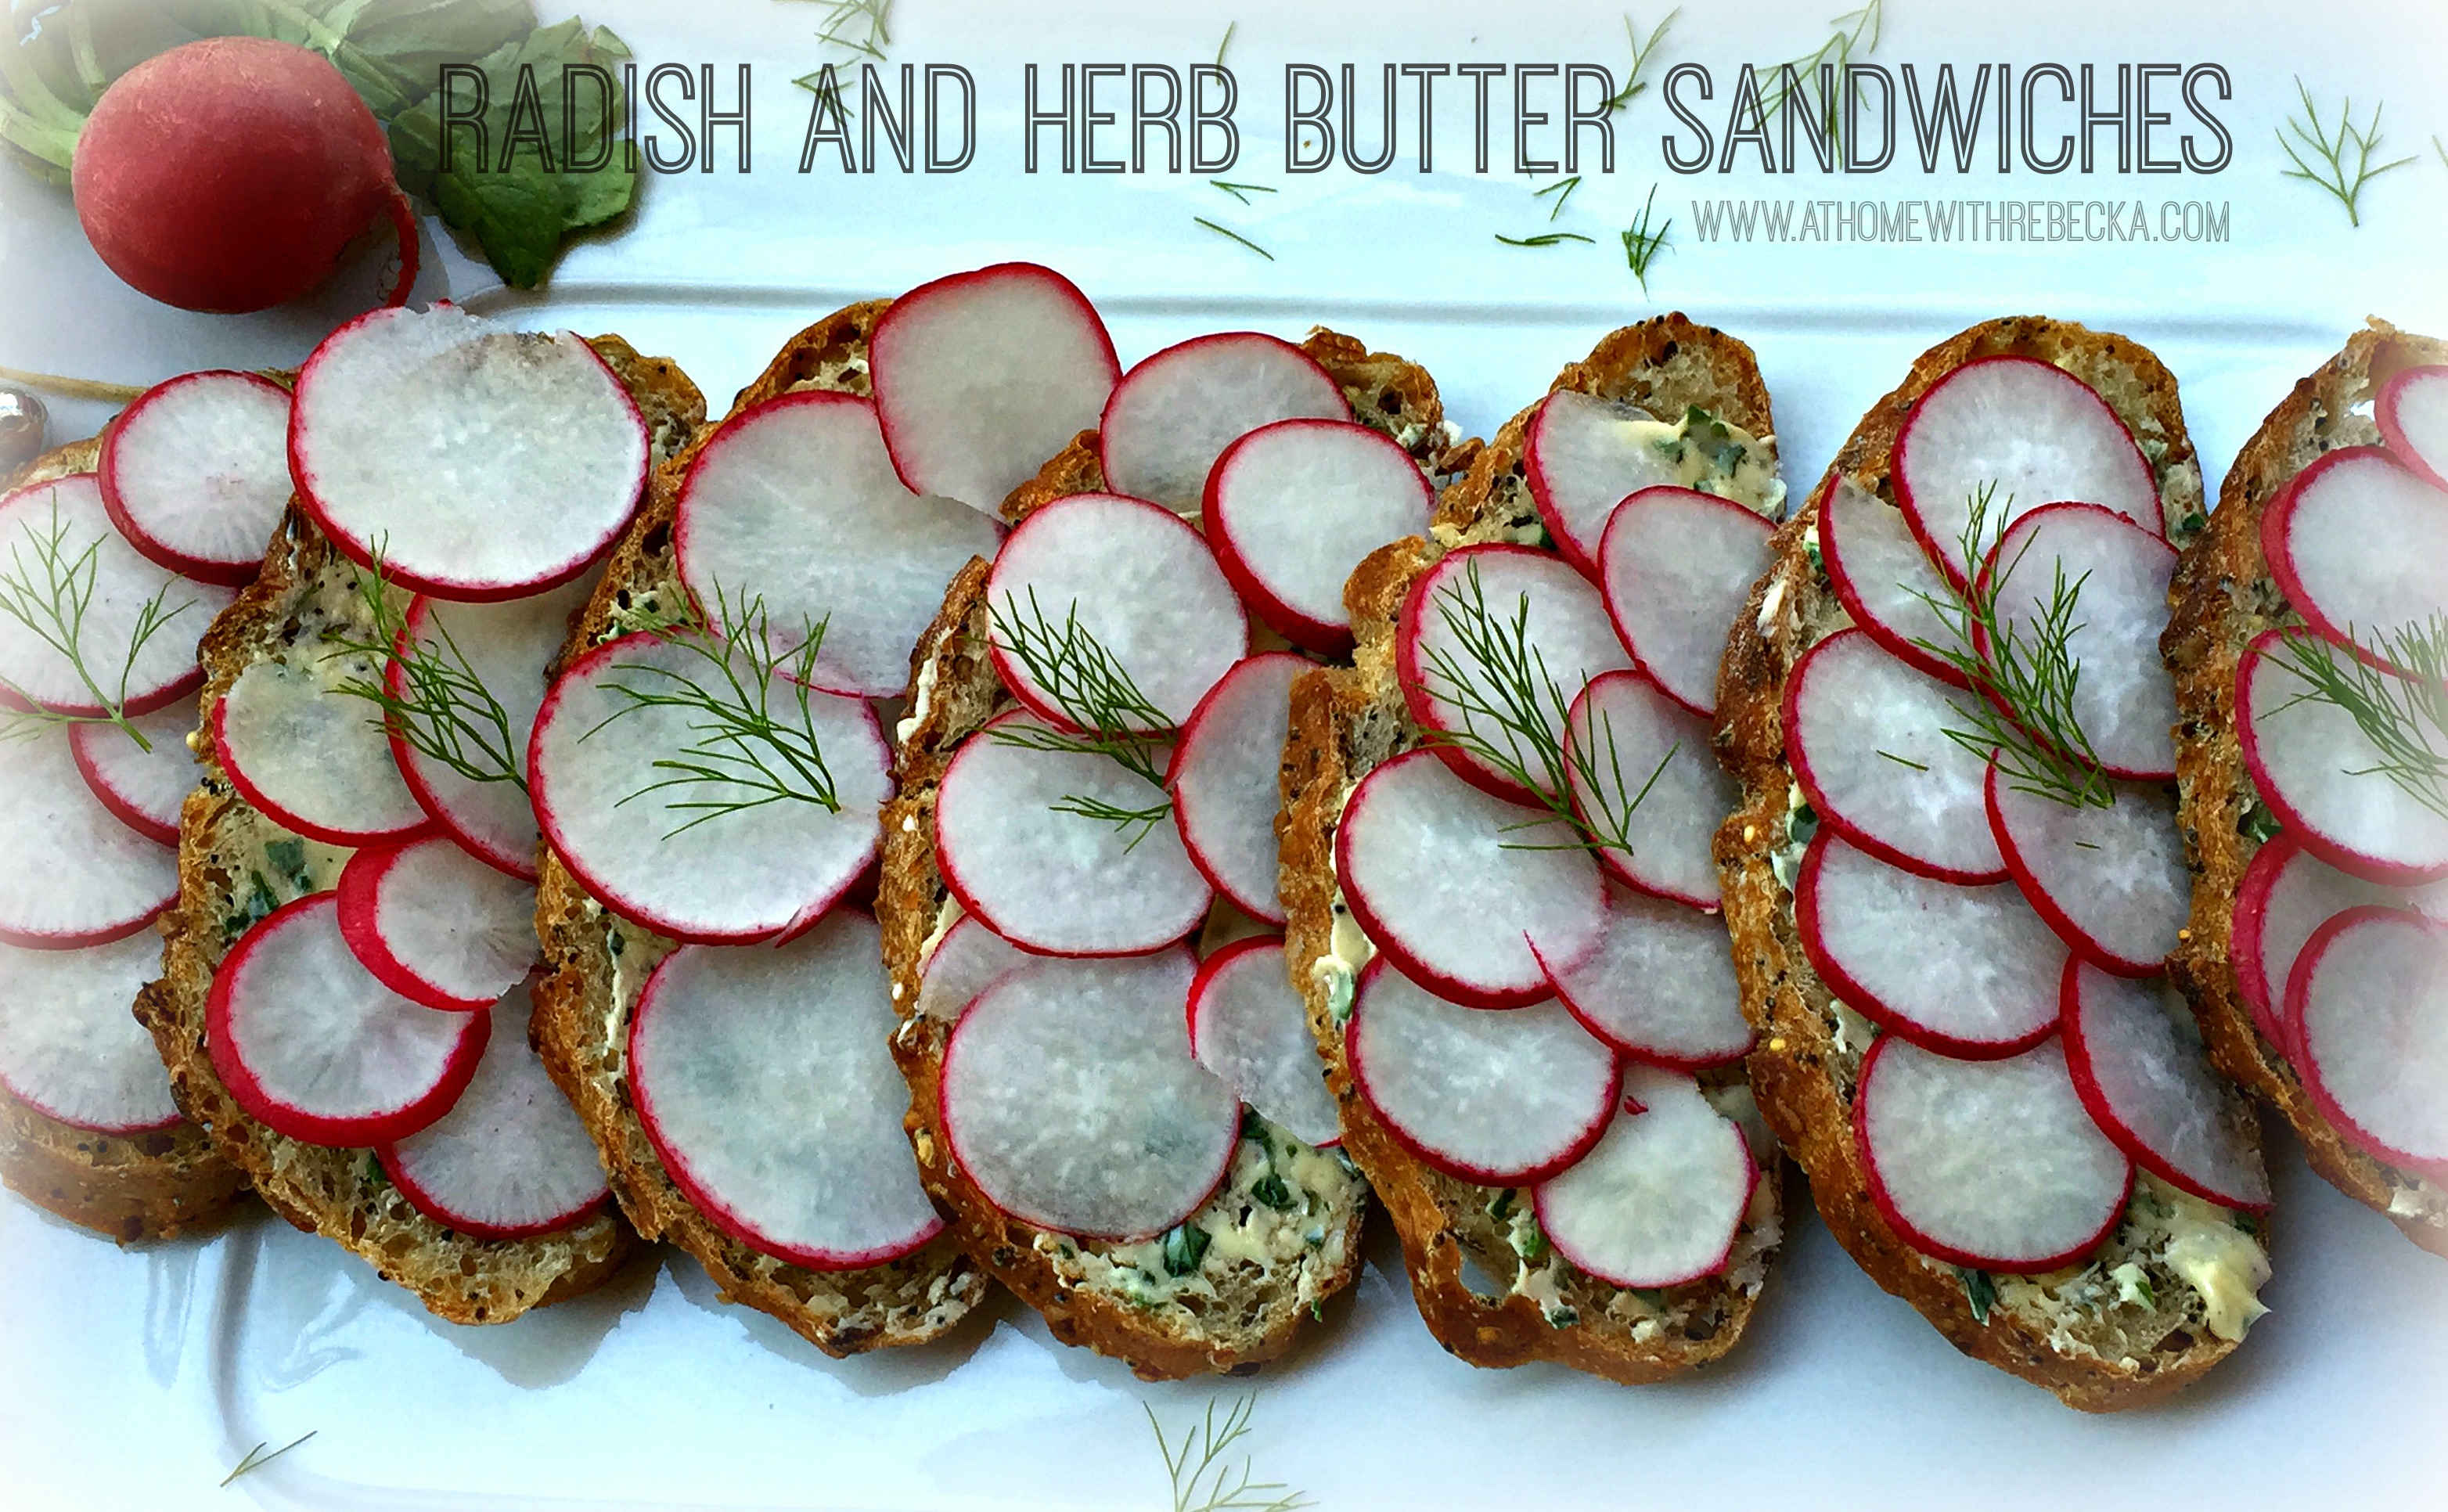 Radish and Herb Butter Sandwiches